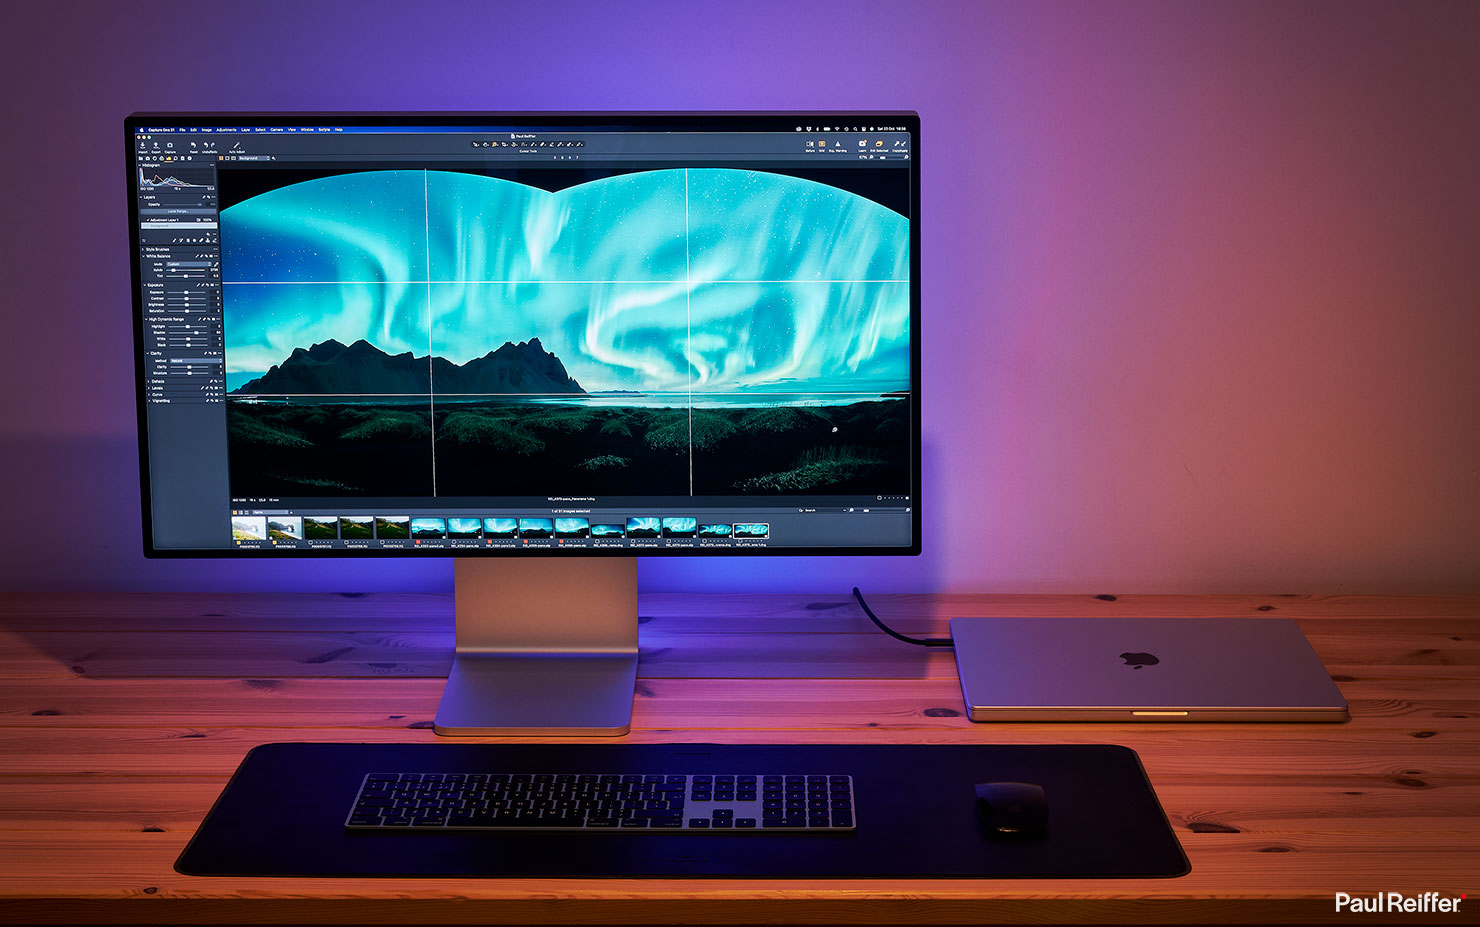 Working Desk XDR Display Dock Workstation Dual Screen Closed October New 2021 Apple M1 MacBook Pro 16 14 inch Max Launch Release Paul Reiffer Testing Benchmark